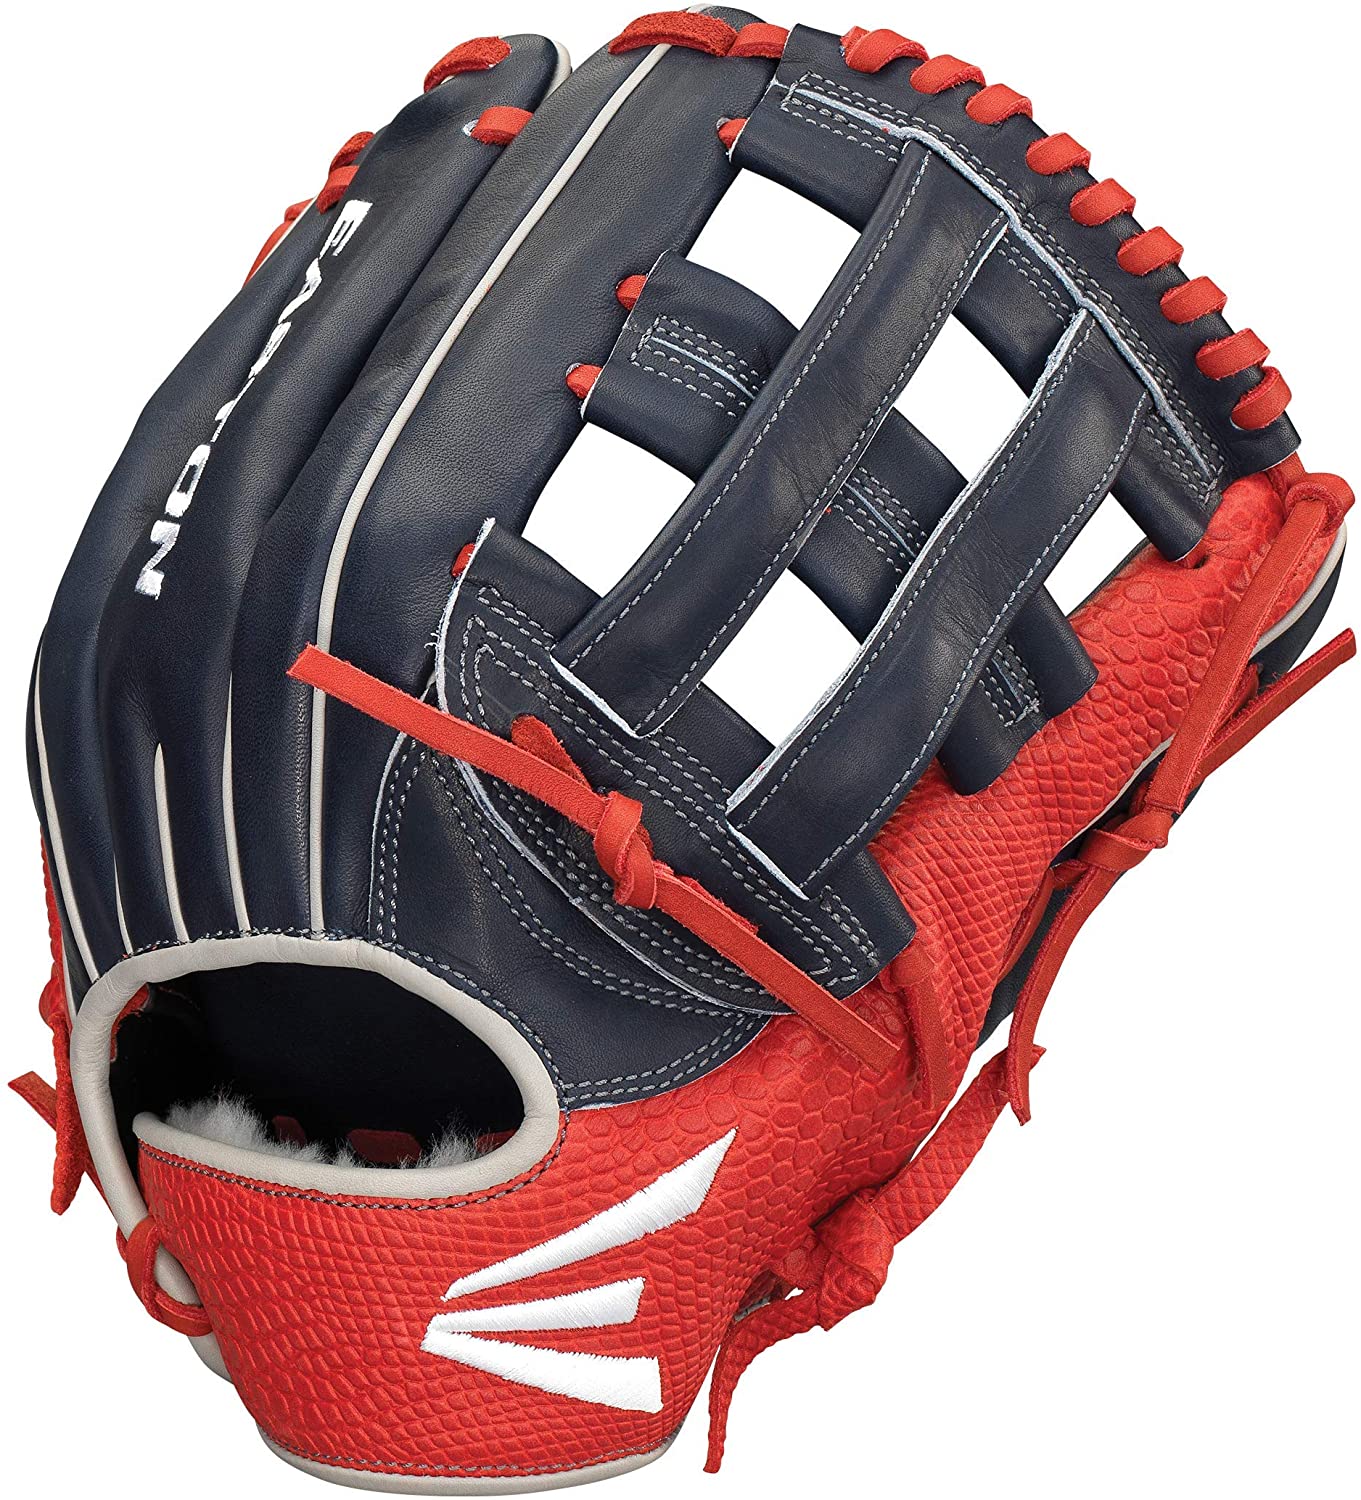 easton-pro-reserve-baseball-glove-jose-ramirez-12-right-hand-throw PRC43JR-RightHandThrow Easton  <p><span>Step on to the field like a Pro with Easton’s all-new